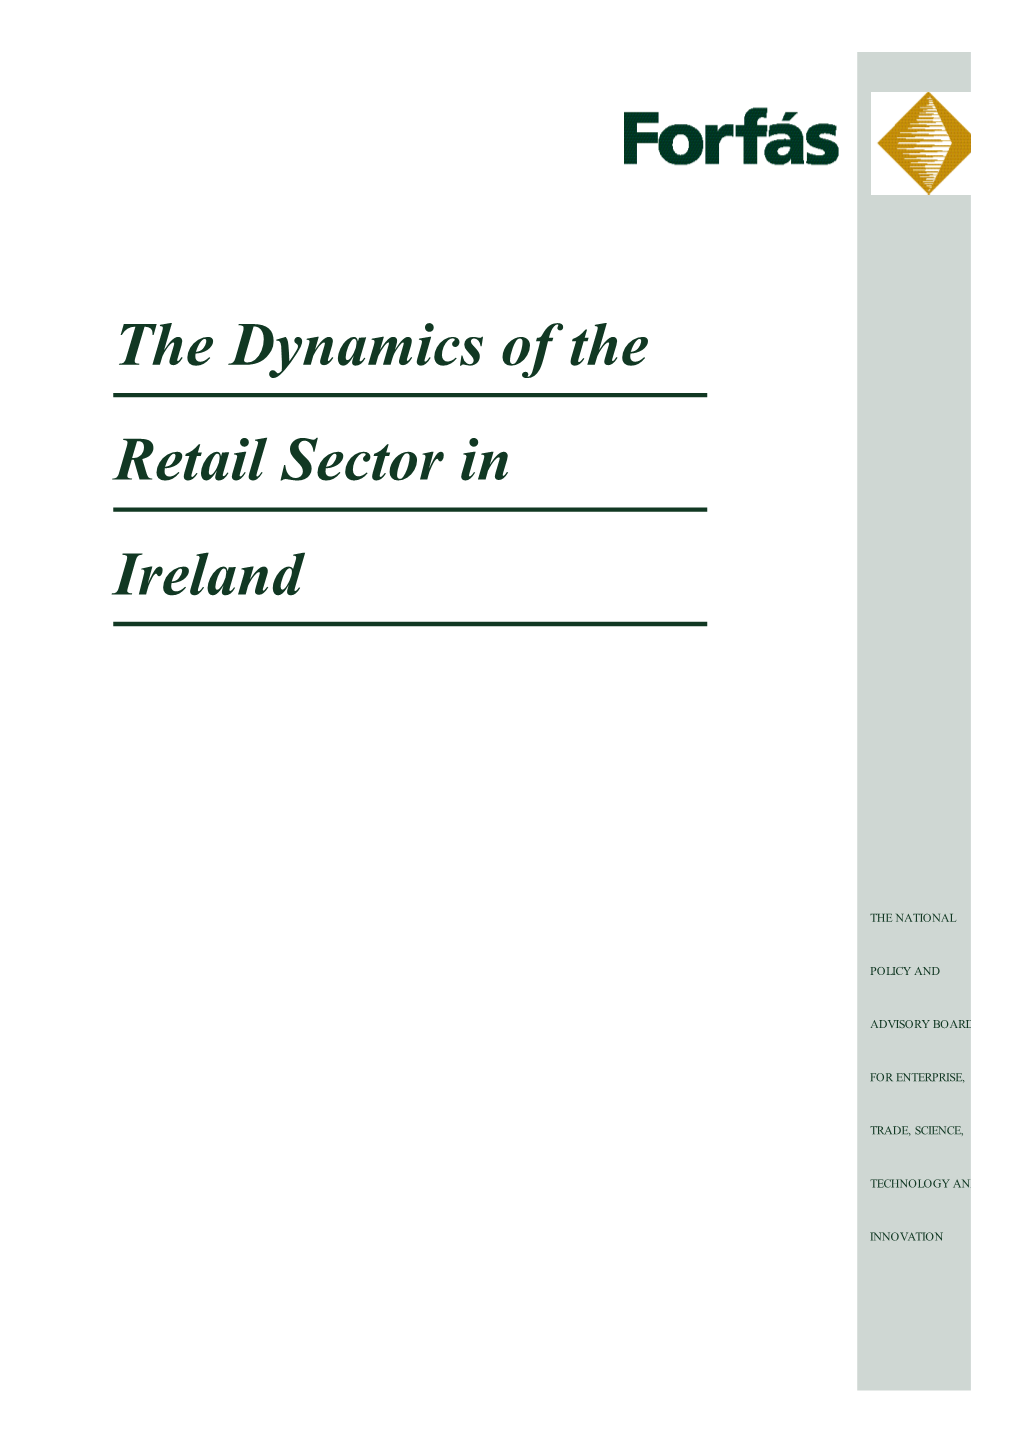 The Dynamics of the Retail Sector in Ireland